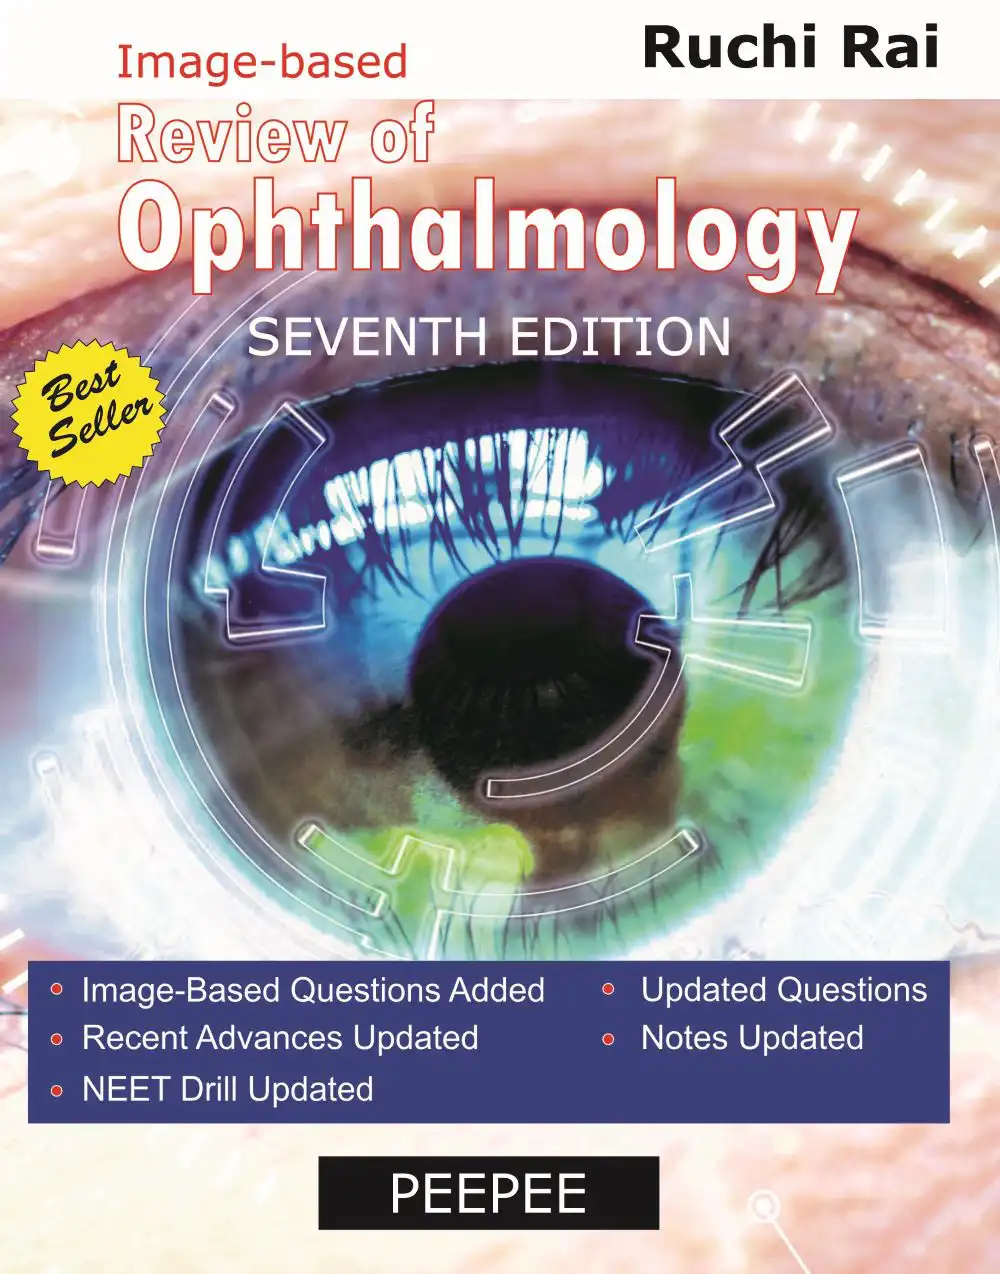 Cover Image of Review of Ophthalmology